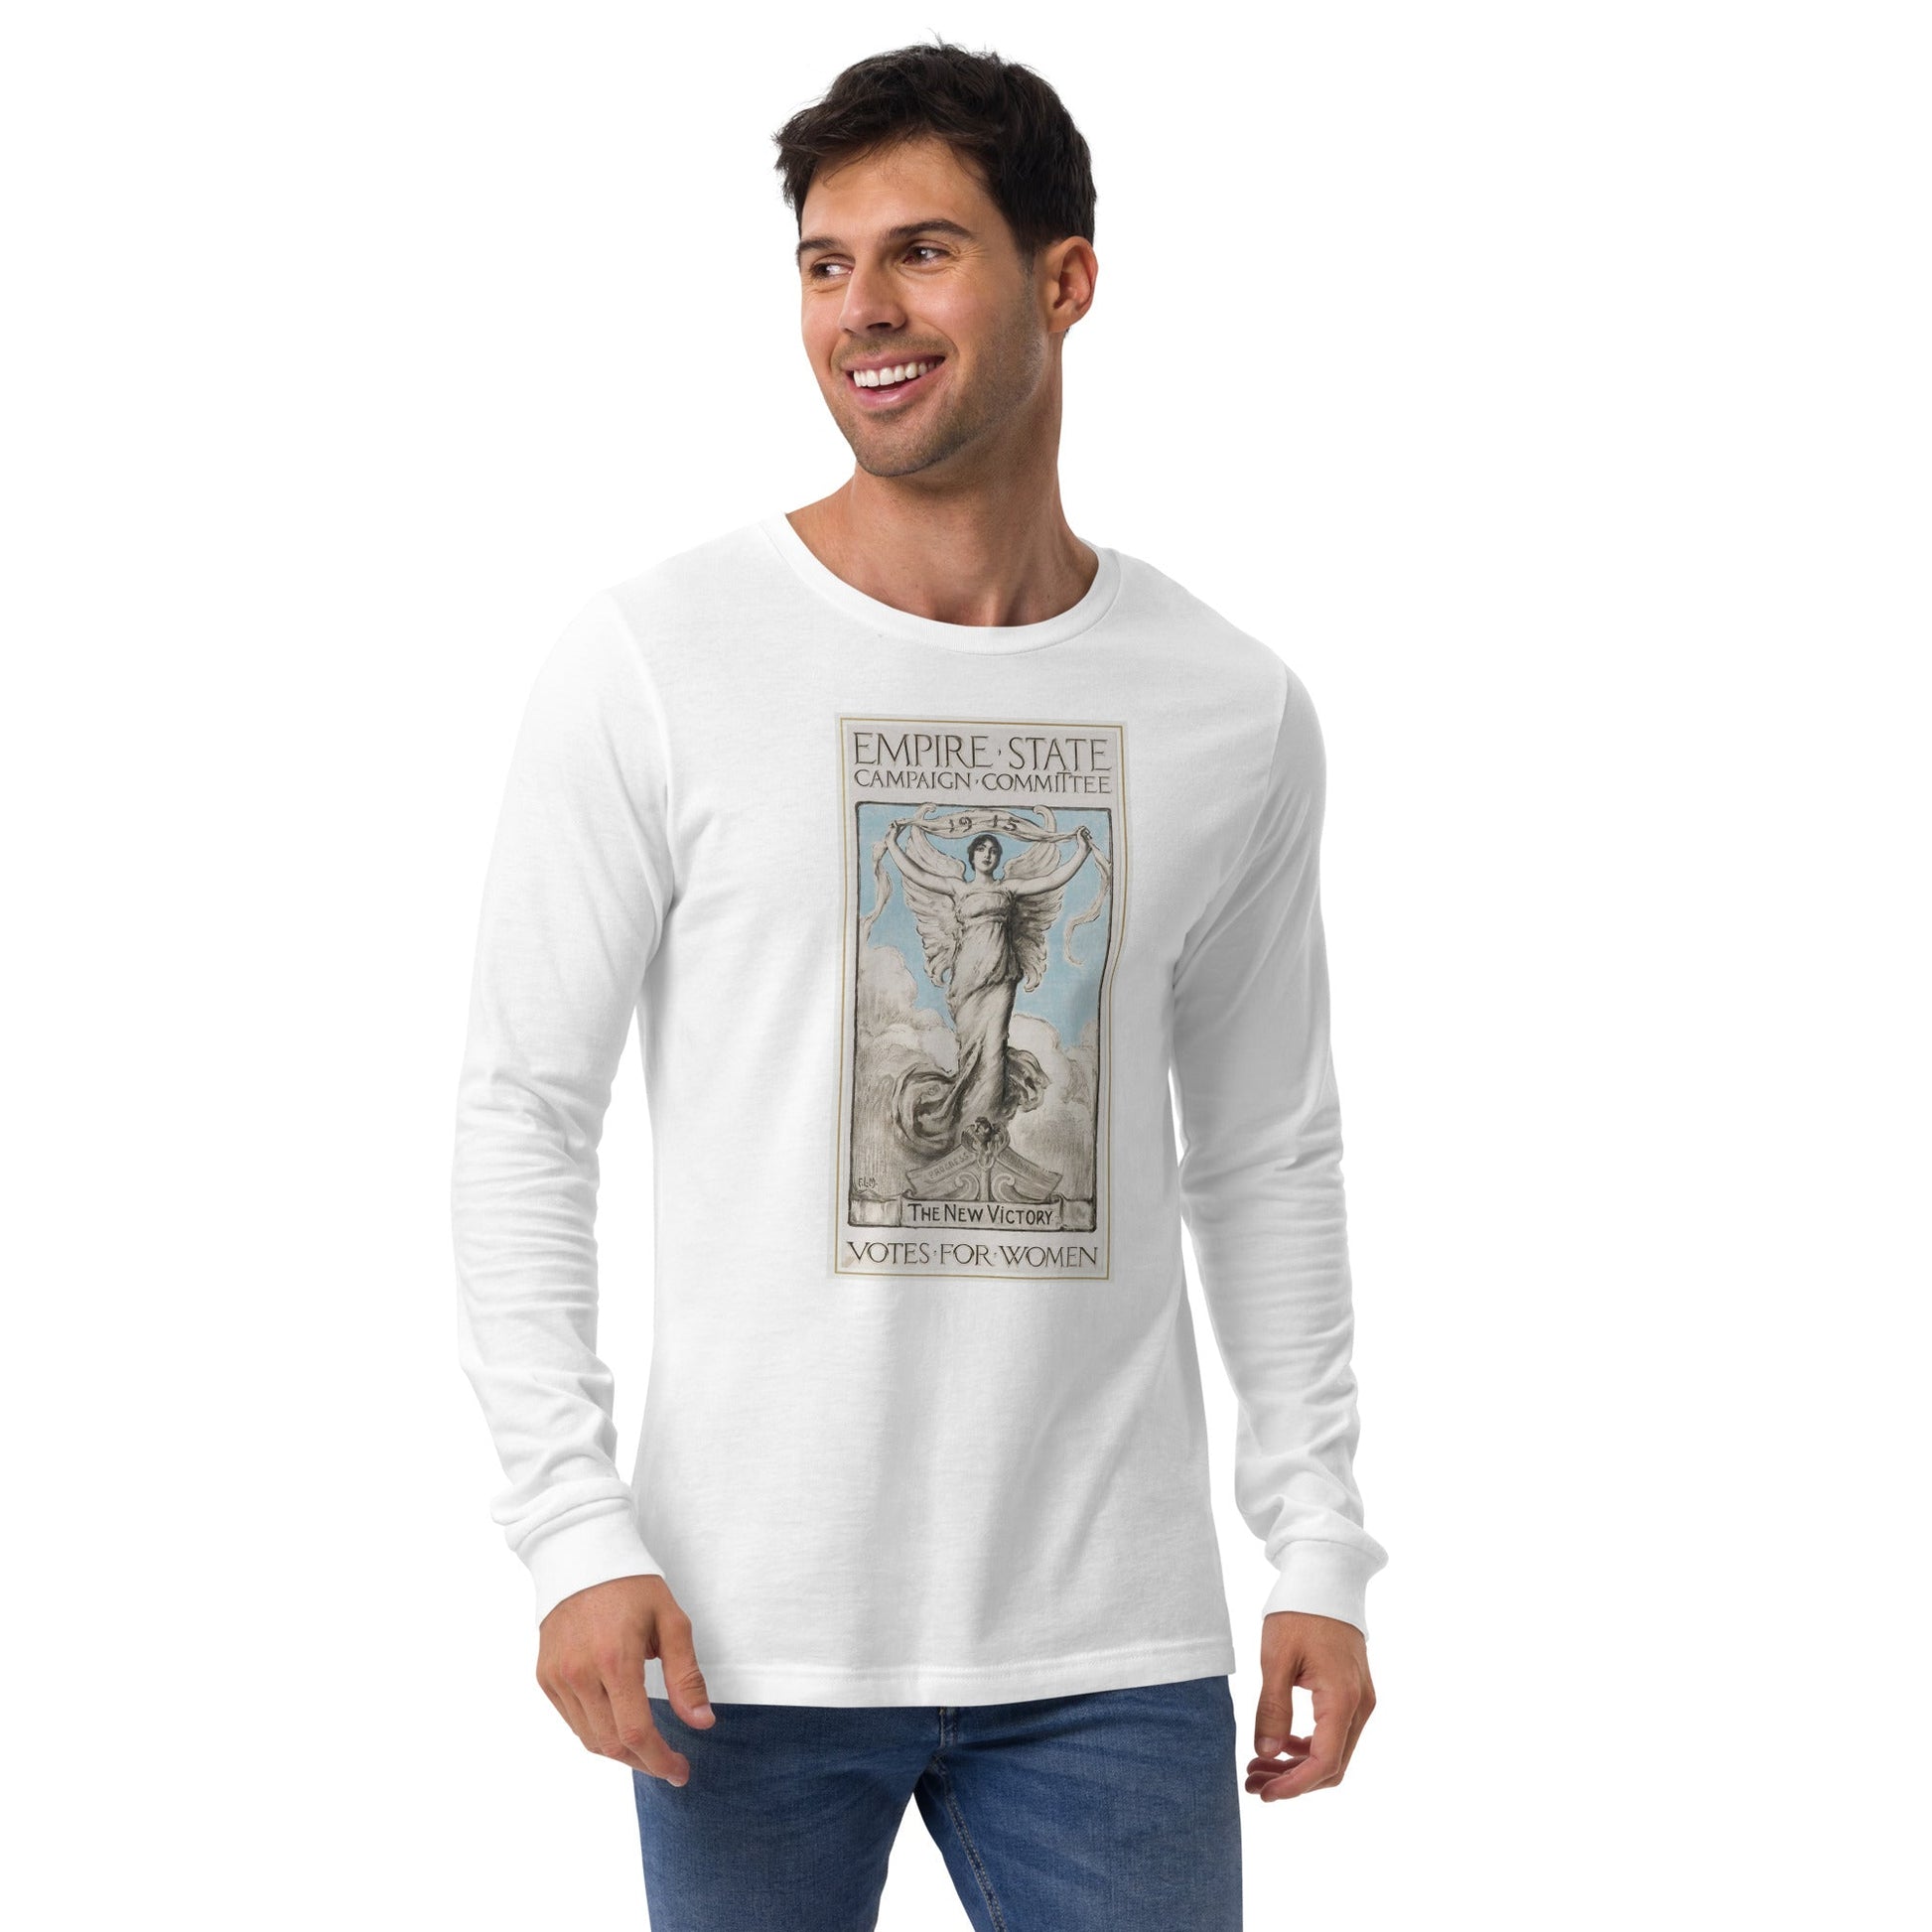 Artis - Unisex Long Sleeve Tee - Souled Out World